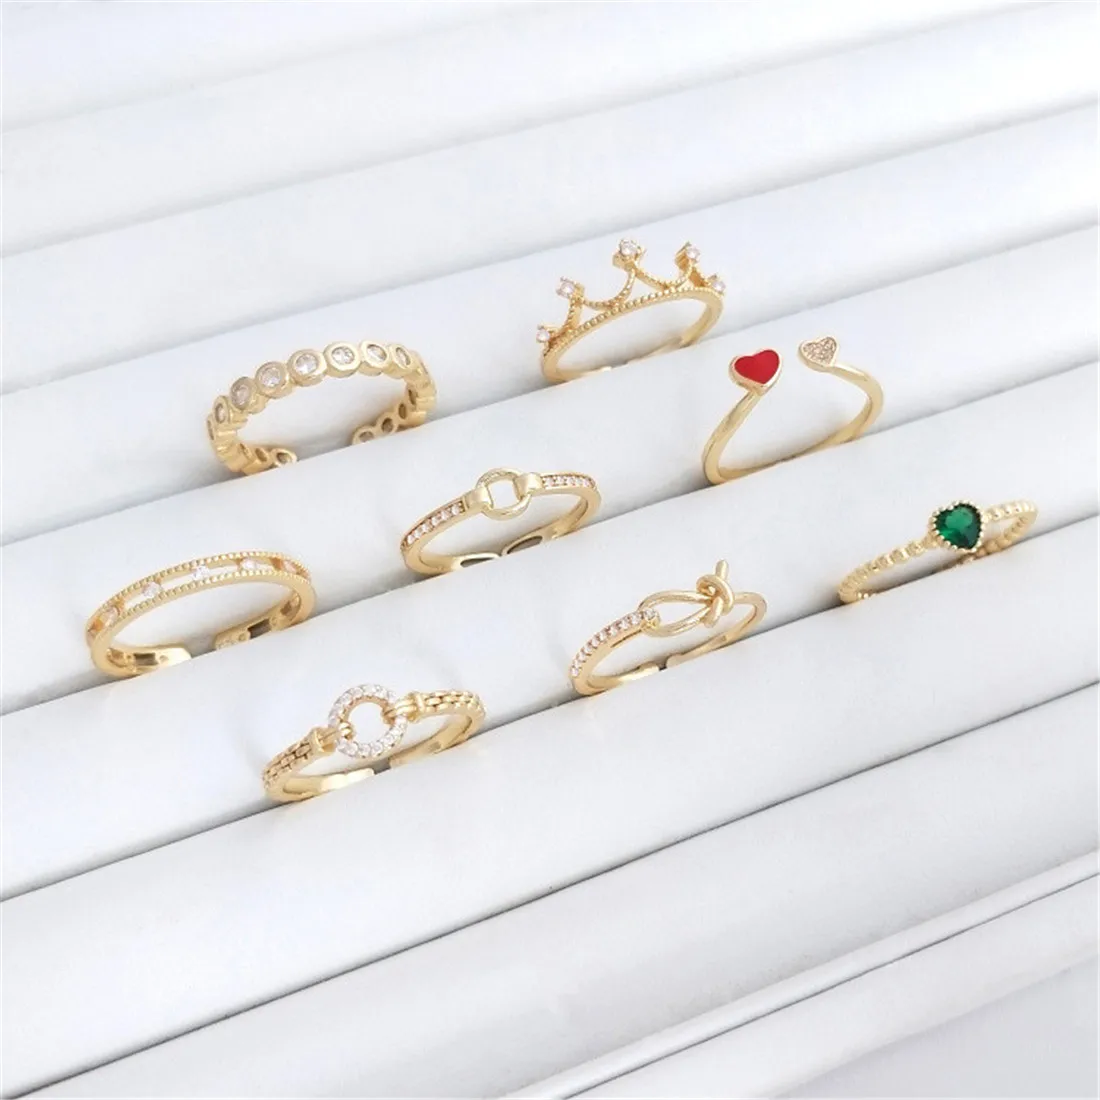 Fashionable Thin Ring 14K Gold Inlaid with Zircon Crown Love Ending Ring Light Luxury Insy Tide Opening Ring B704 a never ending love